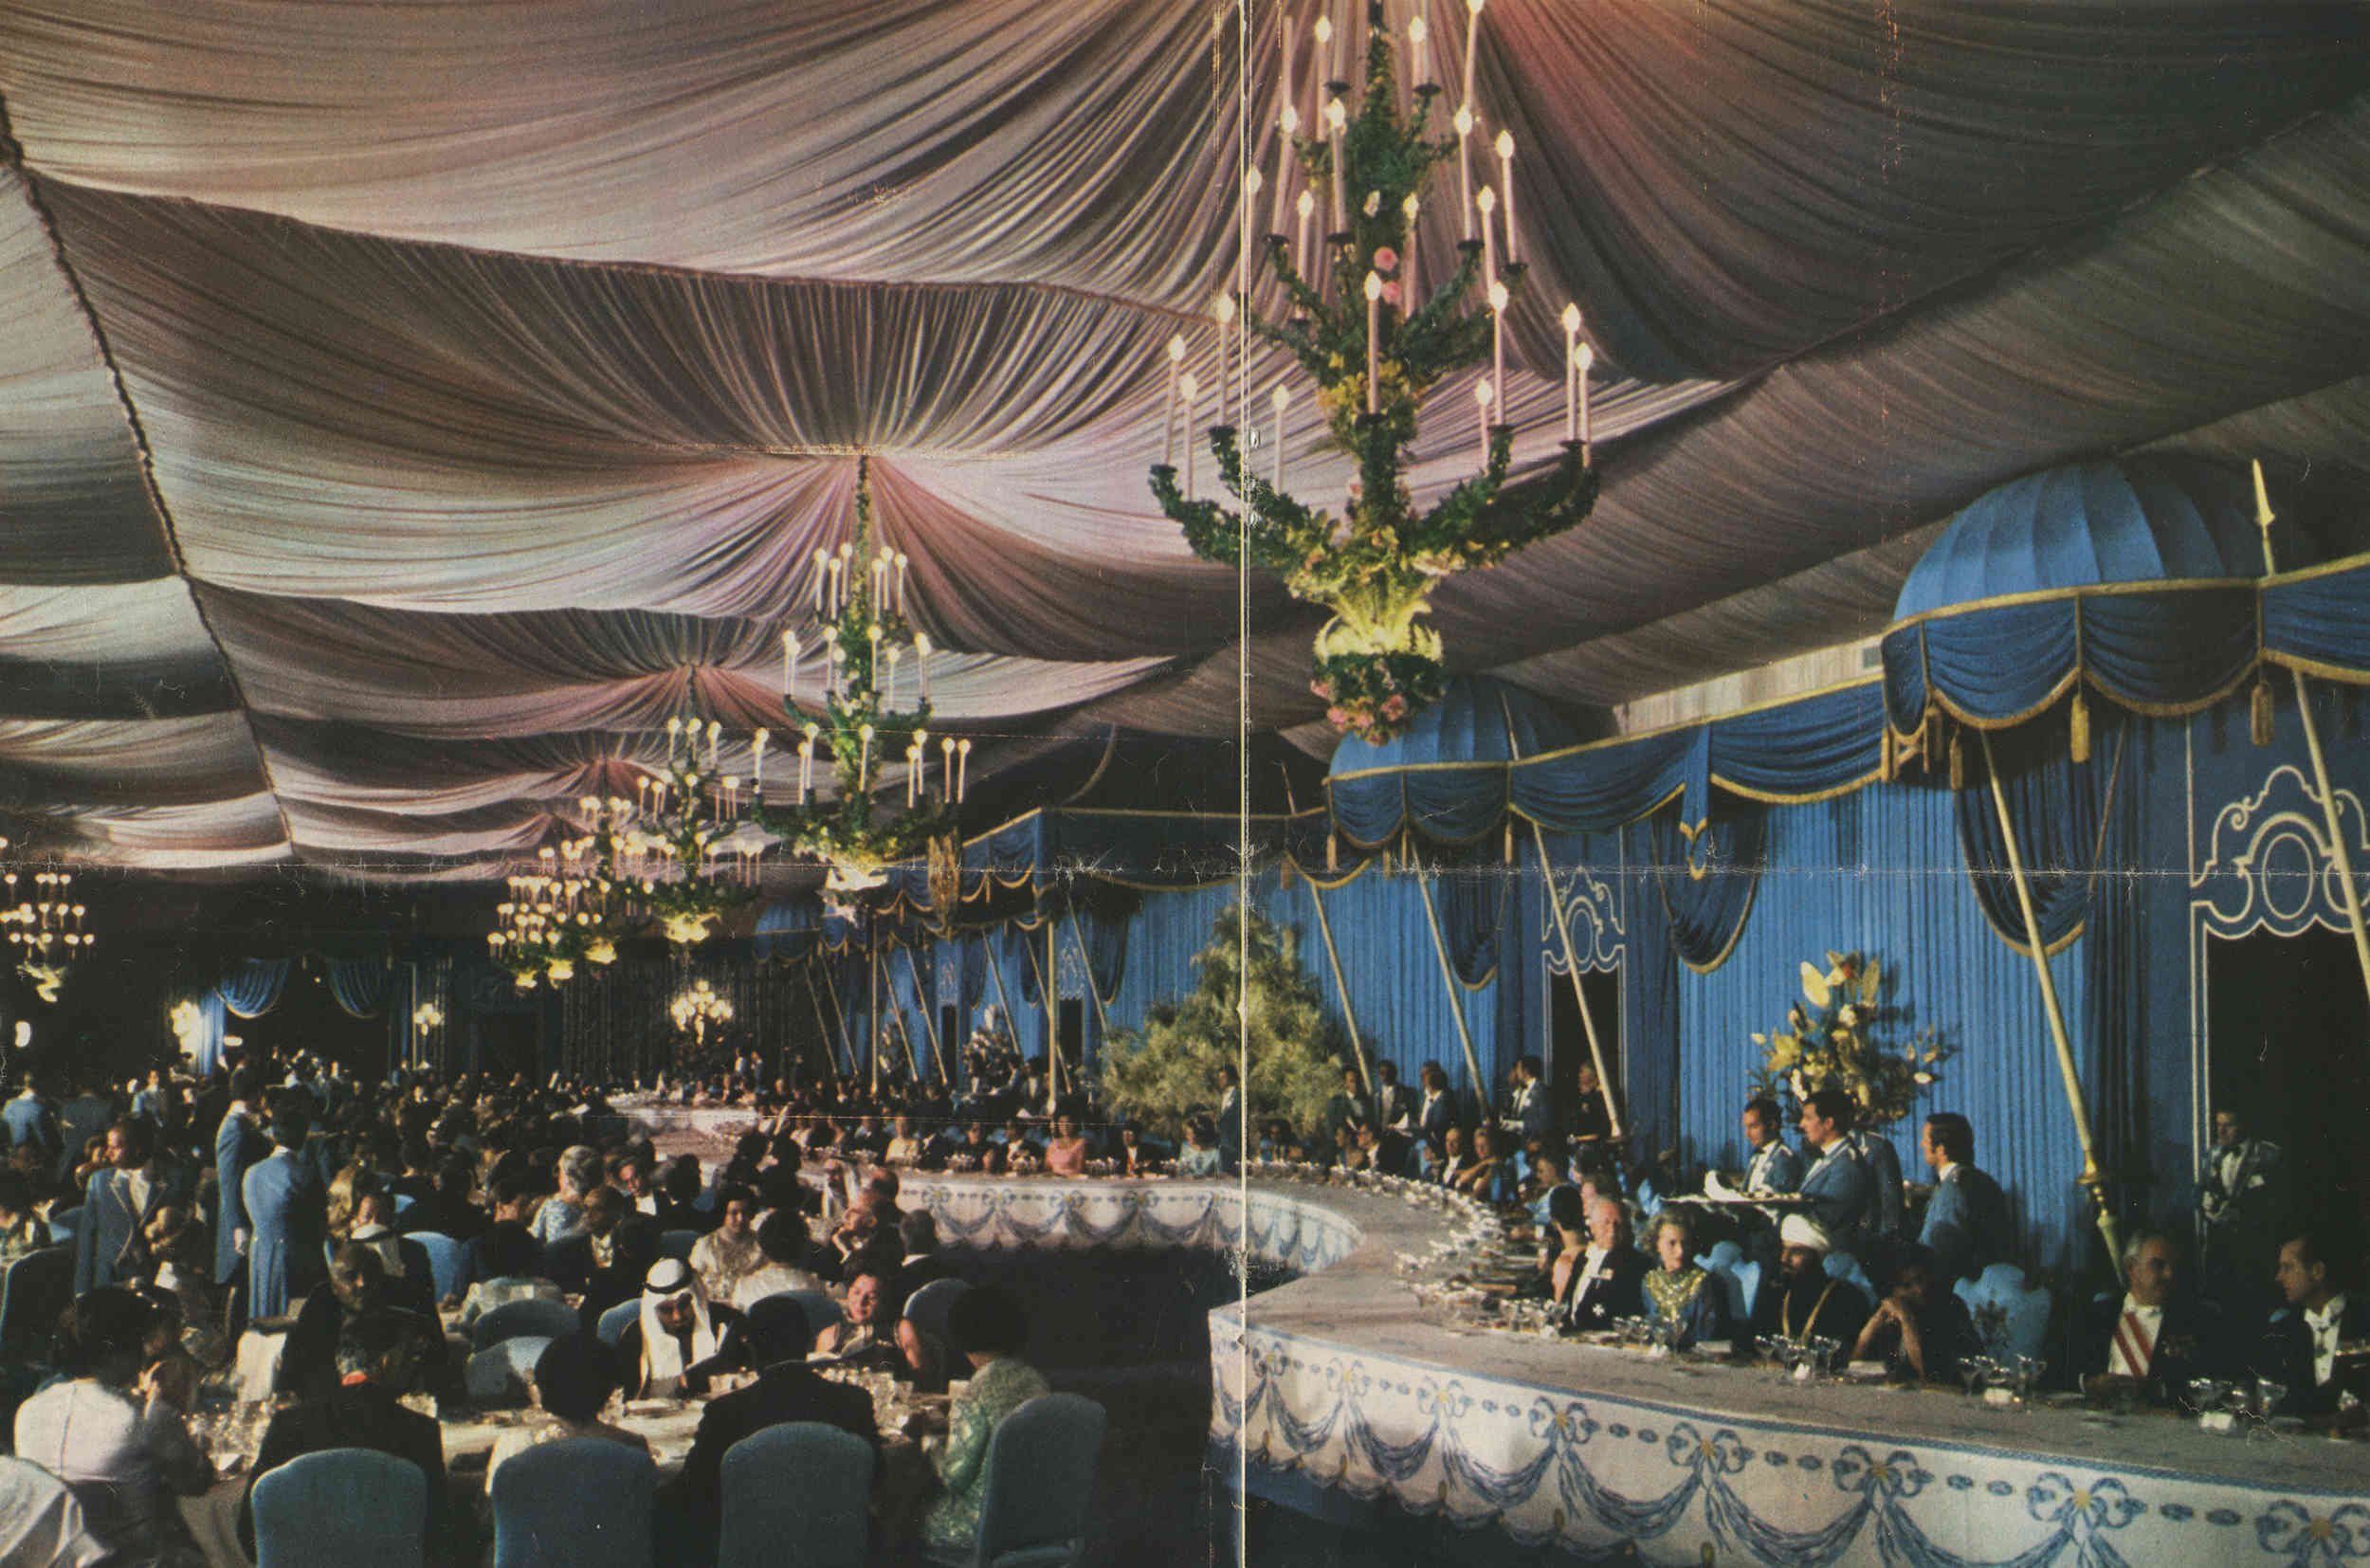 Dinner with royalty and heads of states at the Shah or Iran's celebrations to mark 2,500 years of the Persian Empire in October 1971